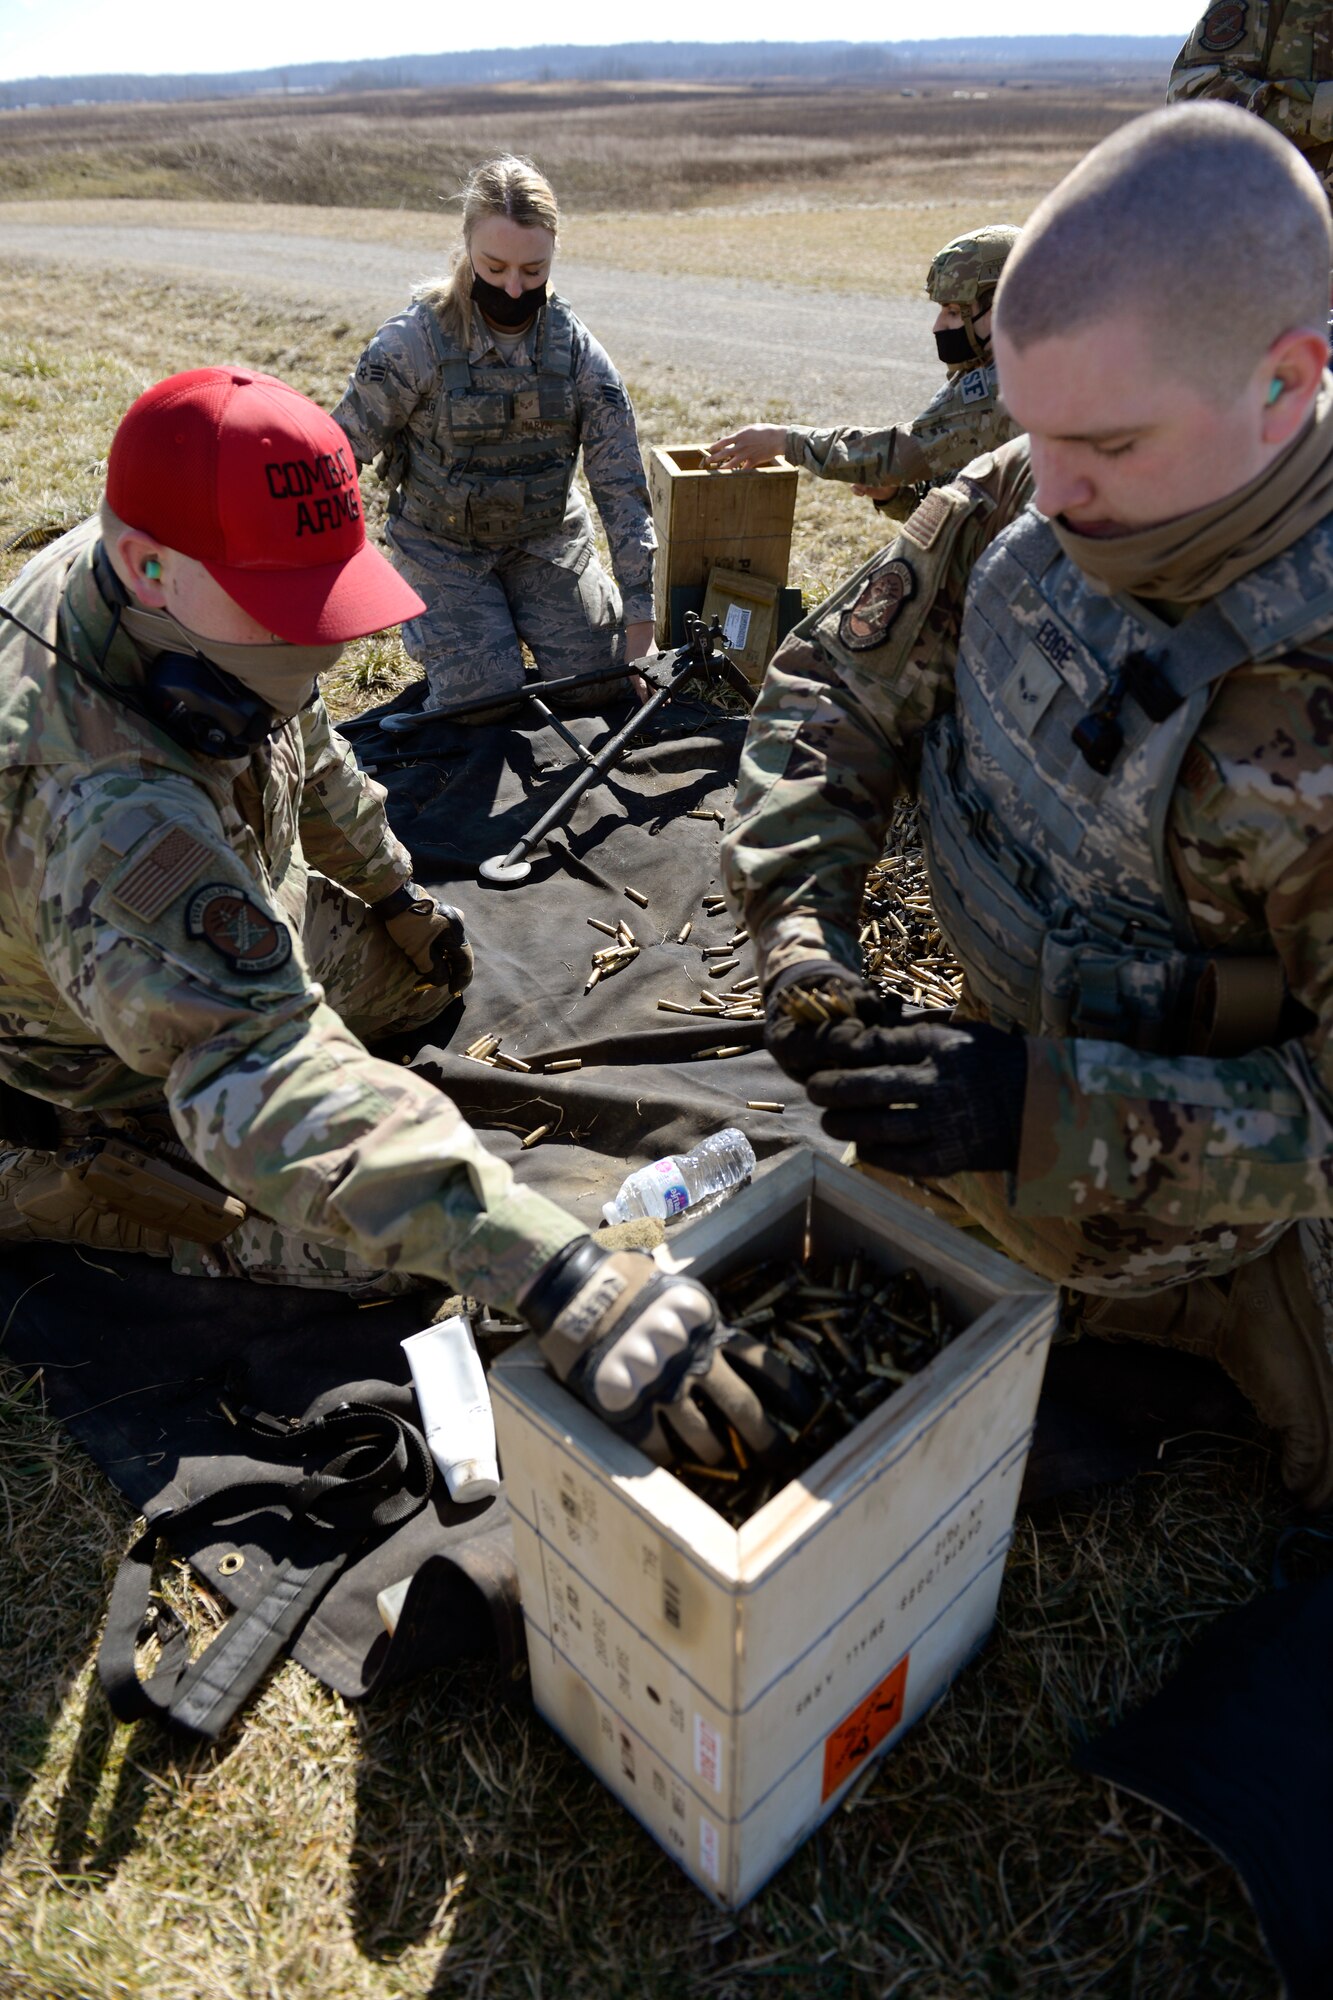 Air Force 88th Security Forces Squadron defenders retrieve bullet casings and machine gun belt clips from an M240B machine gun at Camp Atterbury in Edinburgh, Indiana, on Feb. 25, 2021. Members of the 88th SFS, travel to Camp Atterbury multiple times each year for readiness and qualification training with deployers on machine guns and grenade launchers. (U.S. Air Force photo by Ty Greenlees)